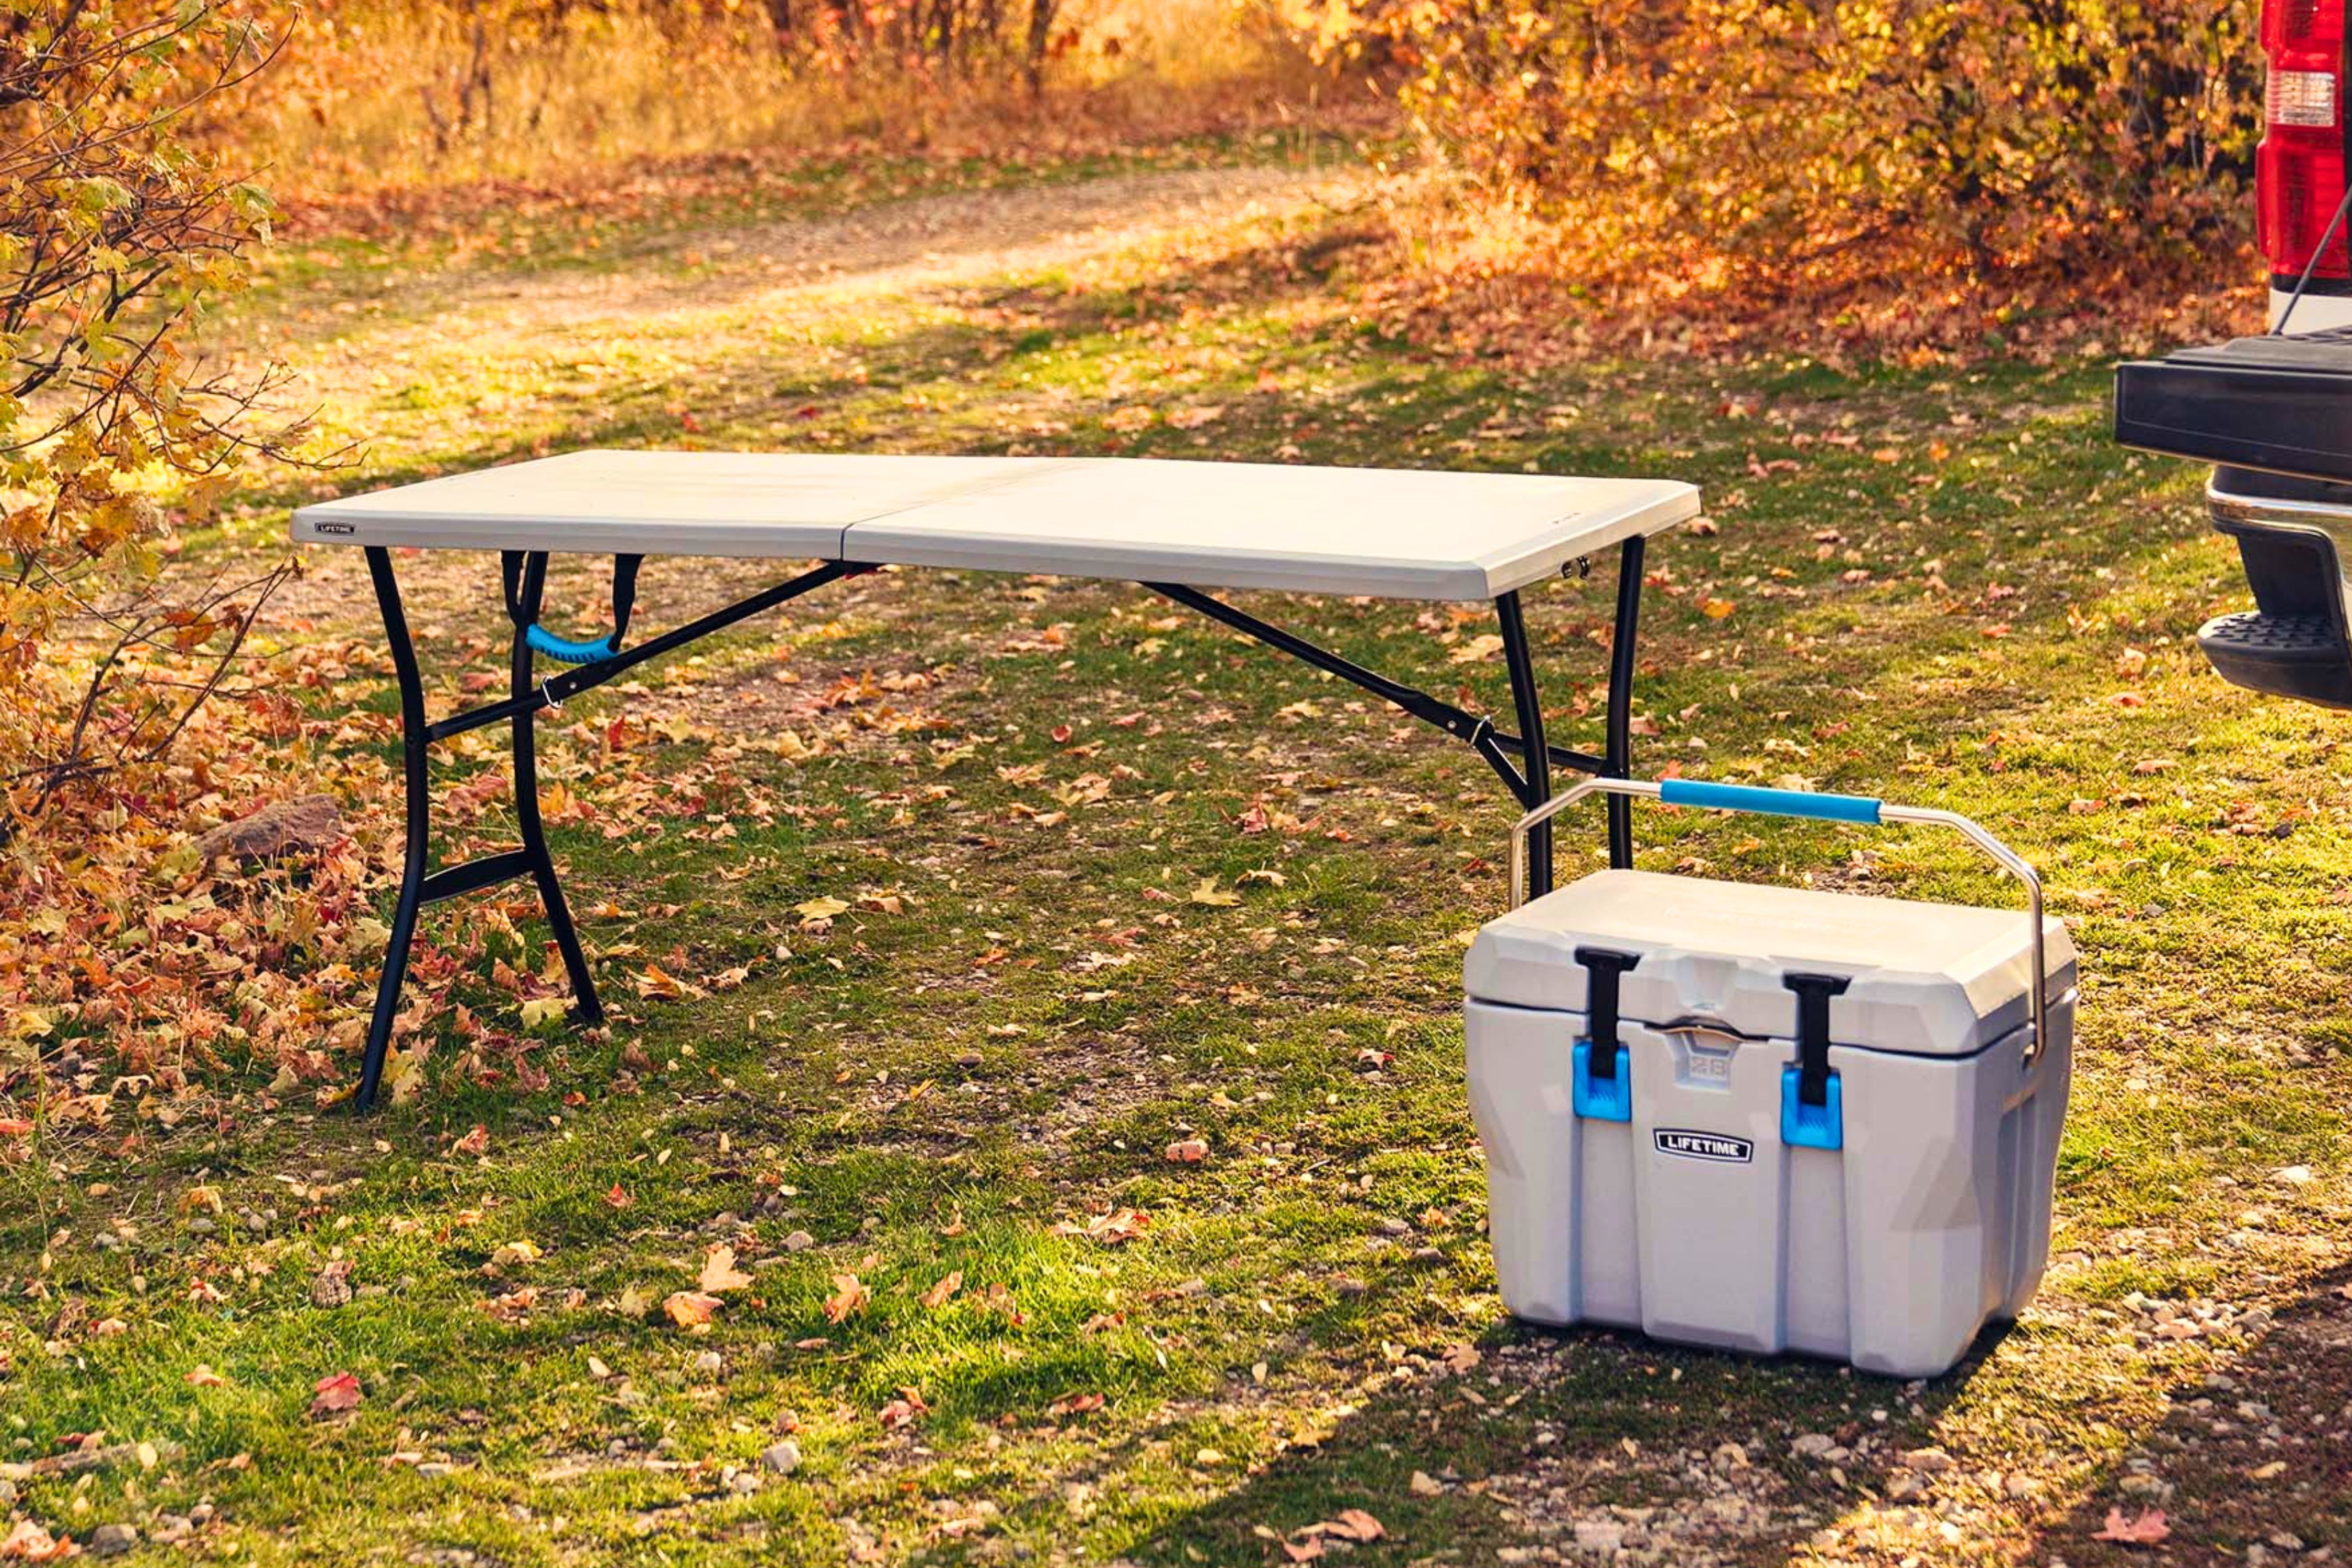 Lifetime 5' Fold-in-Half Outdoor Table, $44.98 at Walmart (Popular Pick) card image